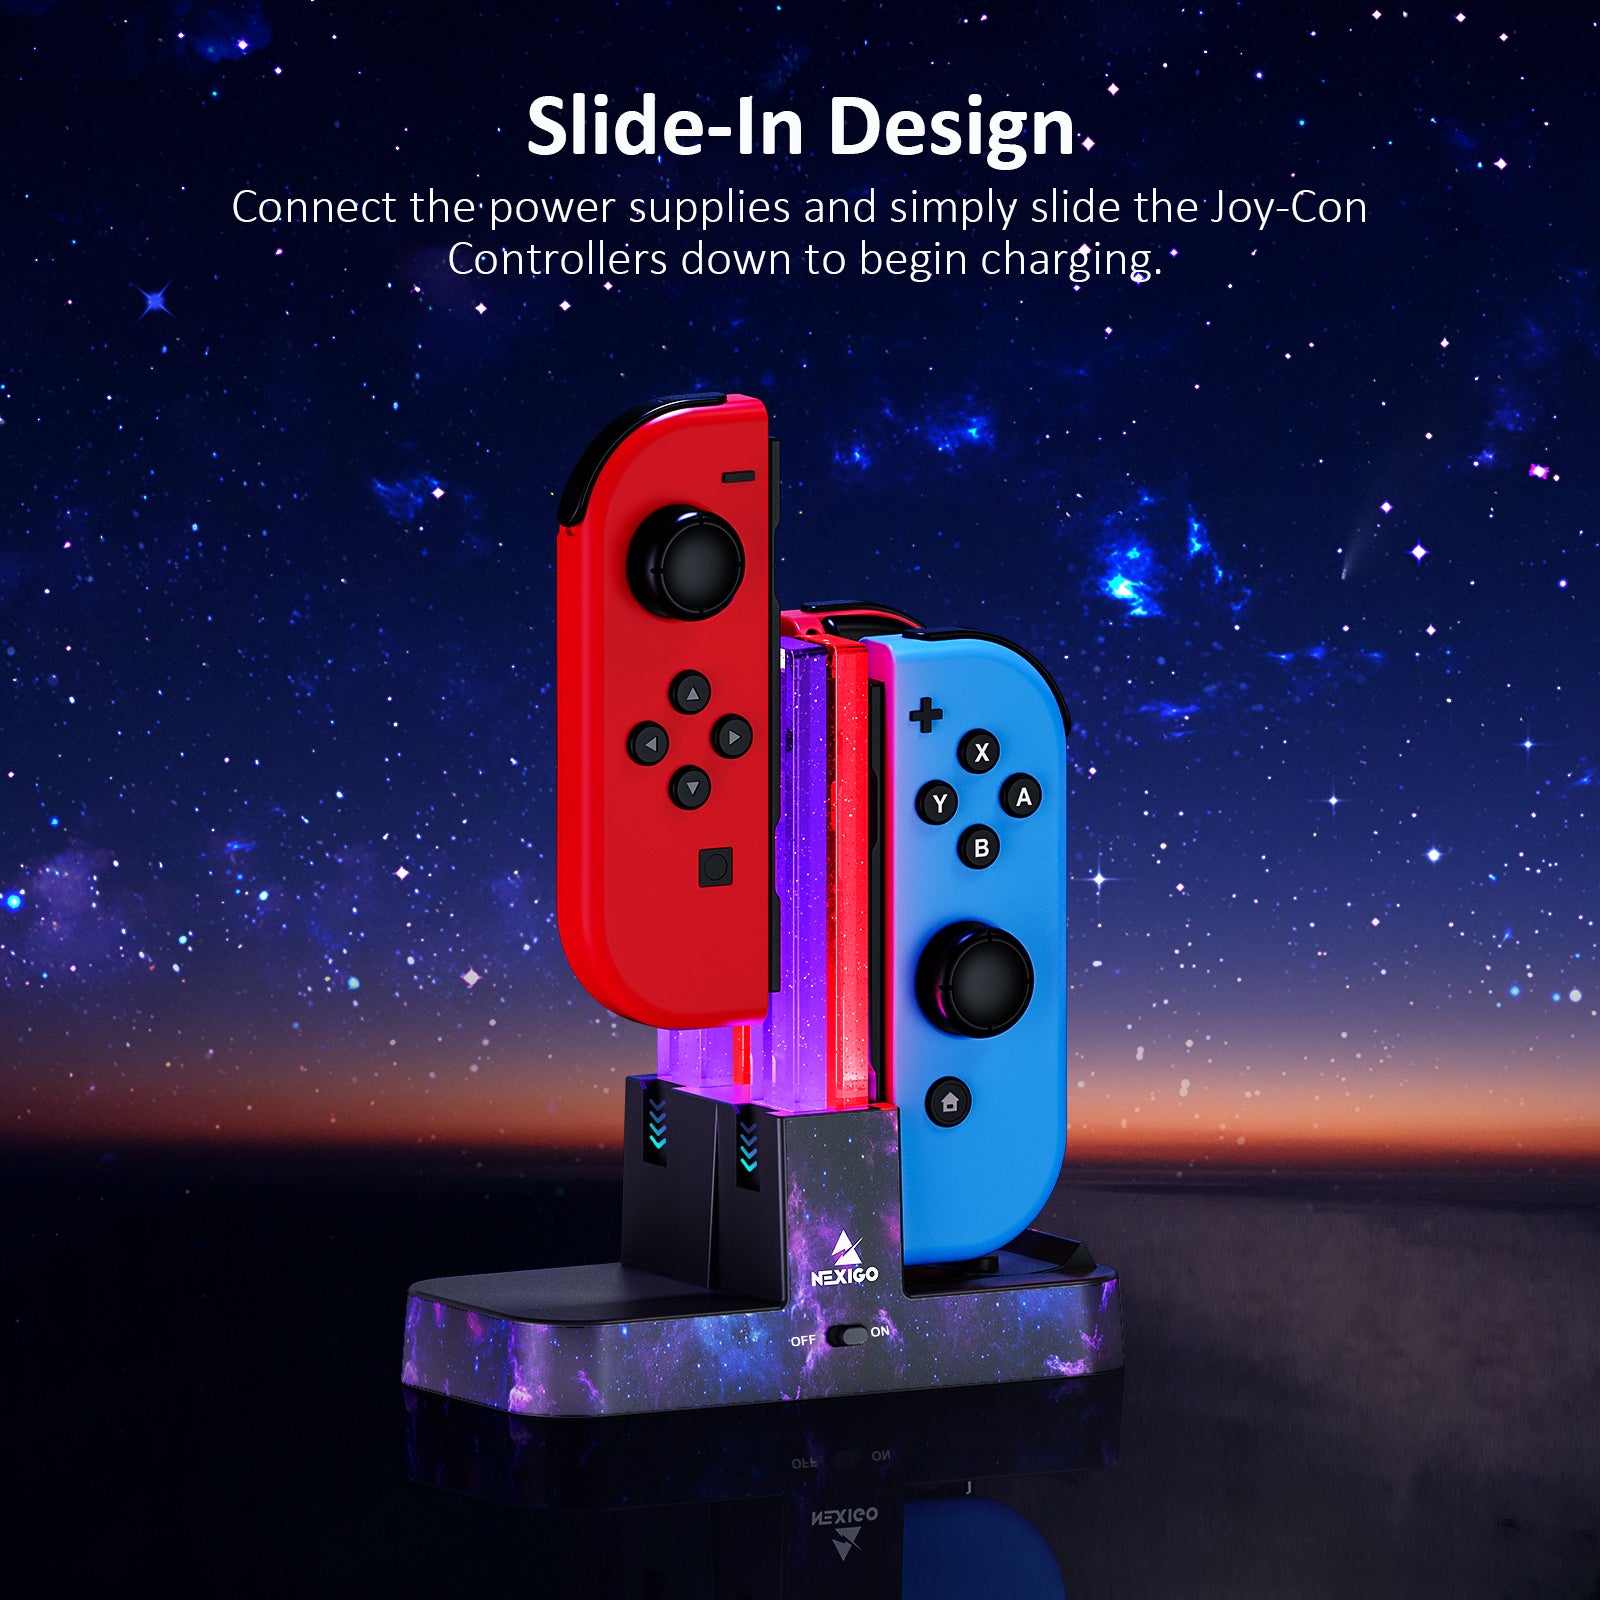 The Joy-Cons can be charged by sliding them into the charging dock.